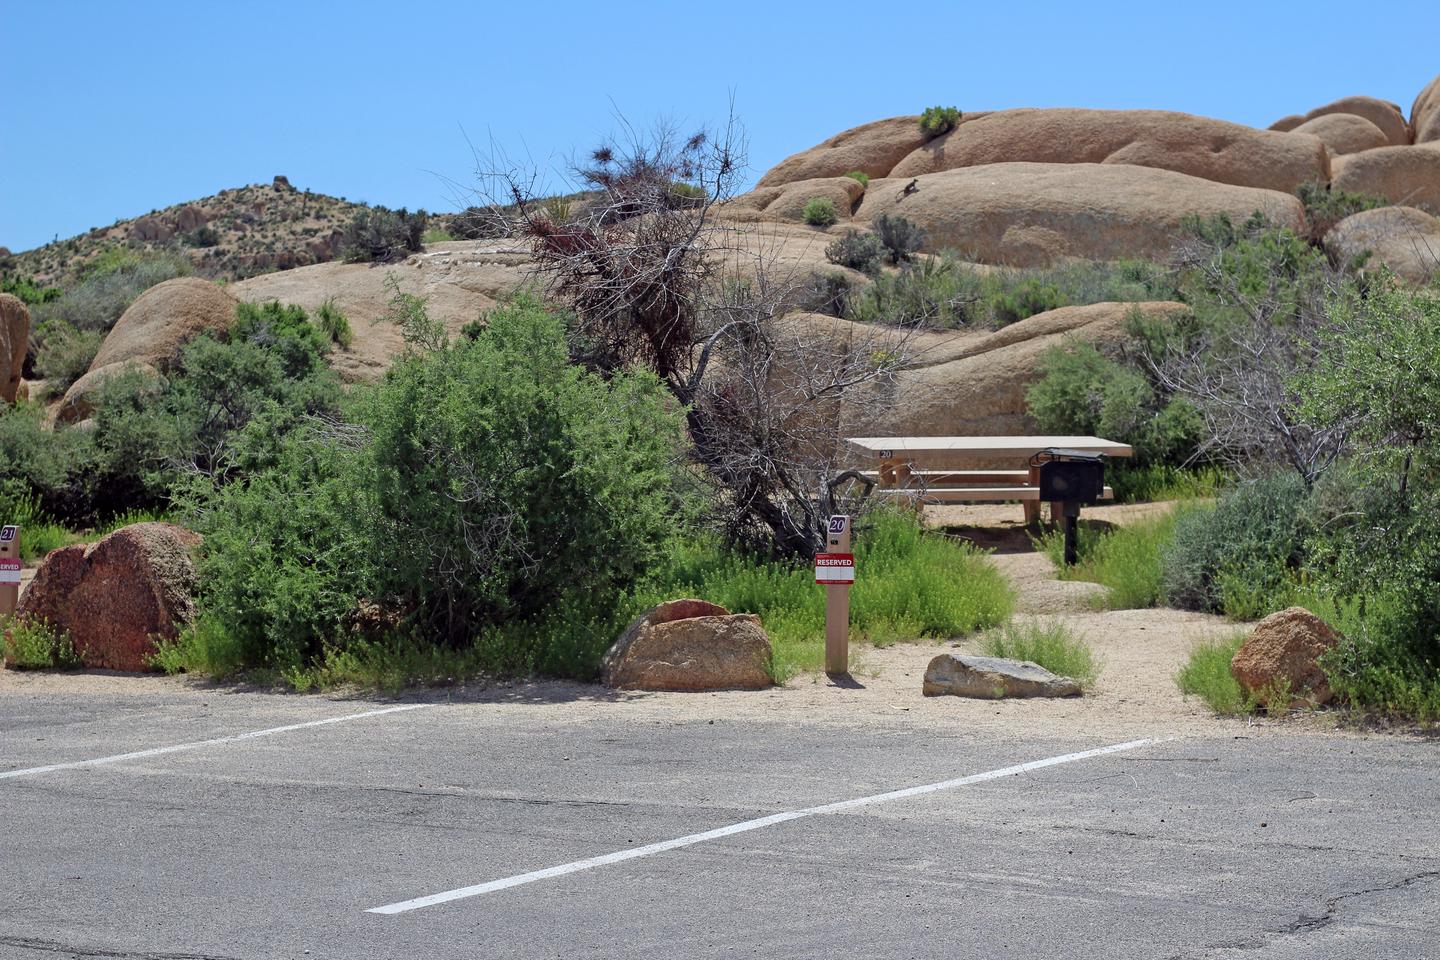 Shared parking for campsite. Picnic table surrounded by boulders and green plants.
Shared parking for campsite.
